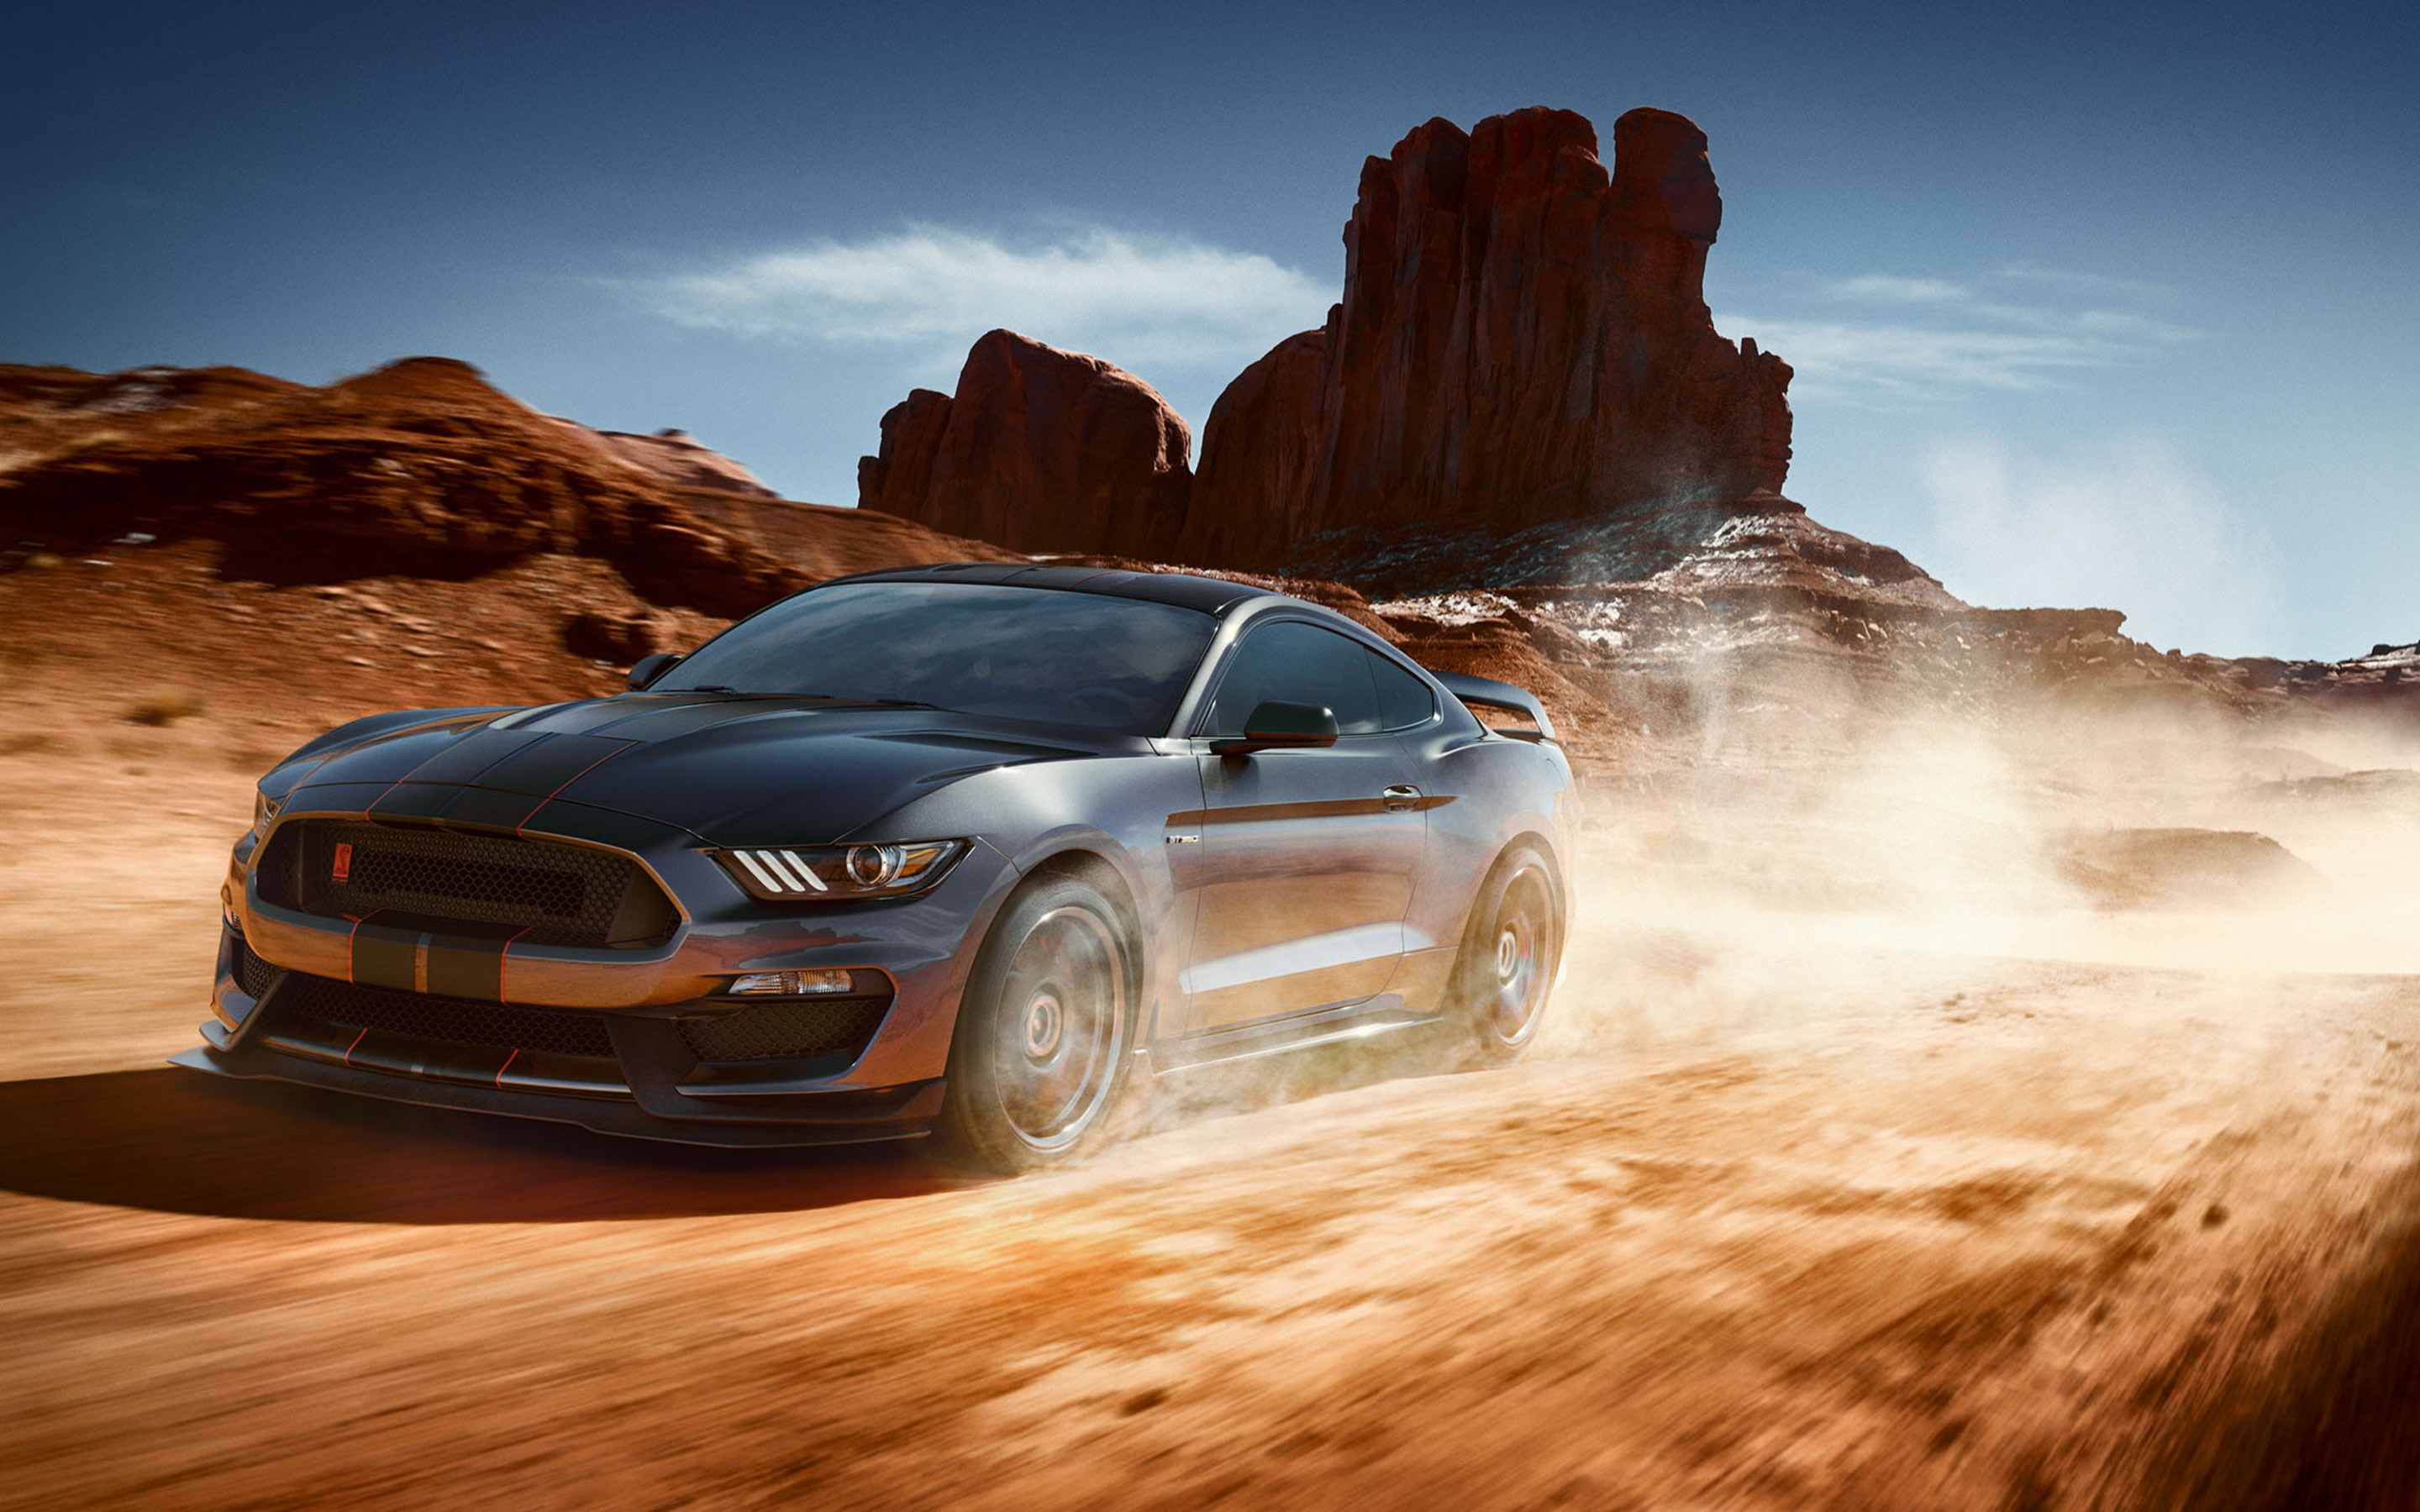 2880x1800 Ford Mustang Shelby GT350 Macbook Pro Retina HD ...